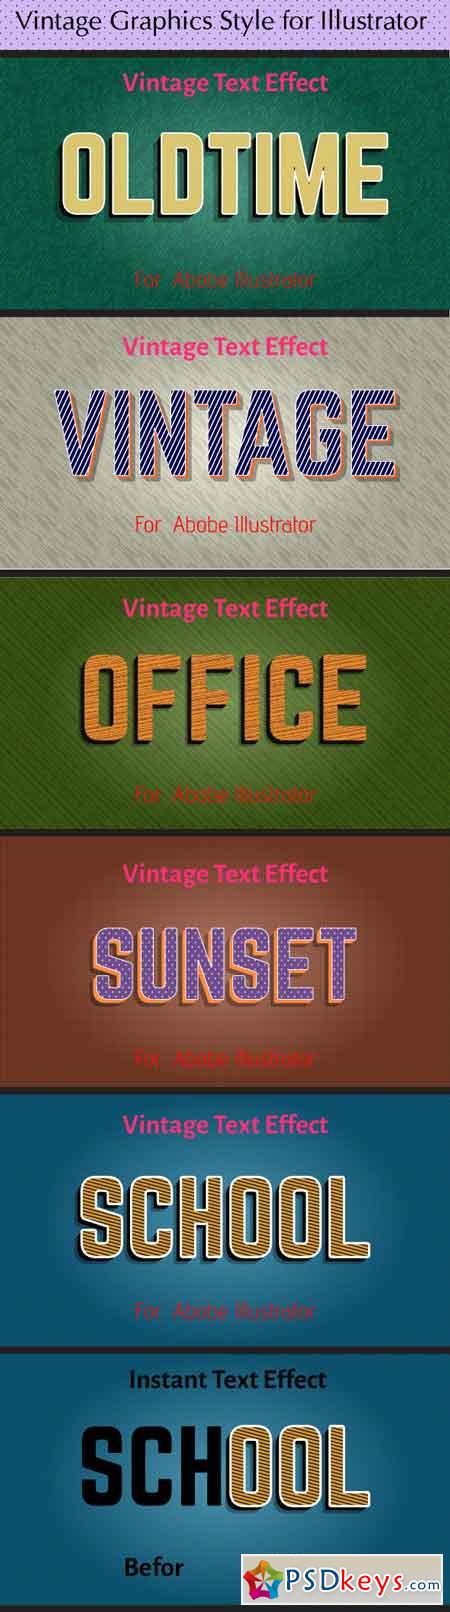 Vintage Graphics Style for Illustrator 22474418